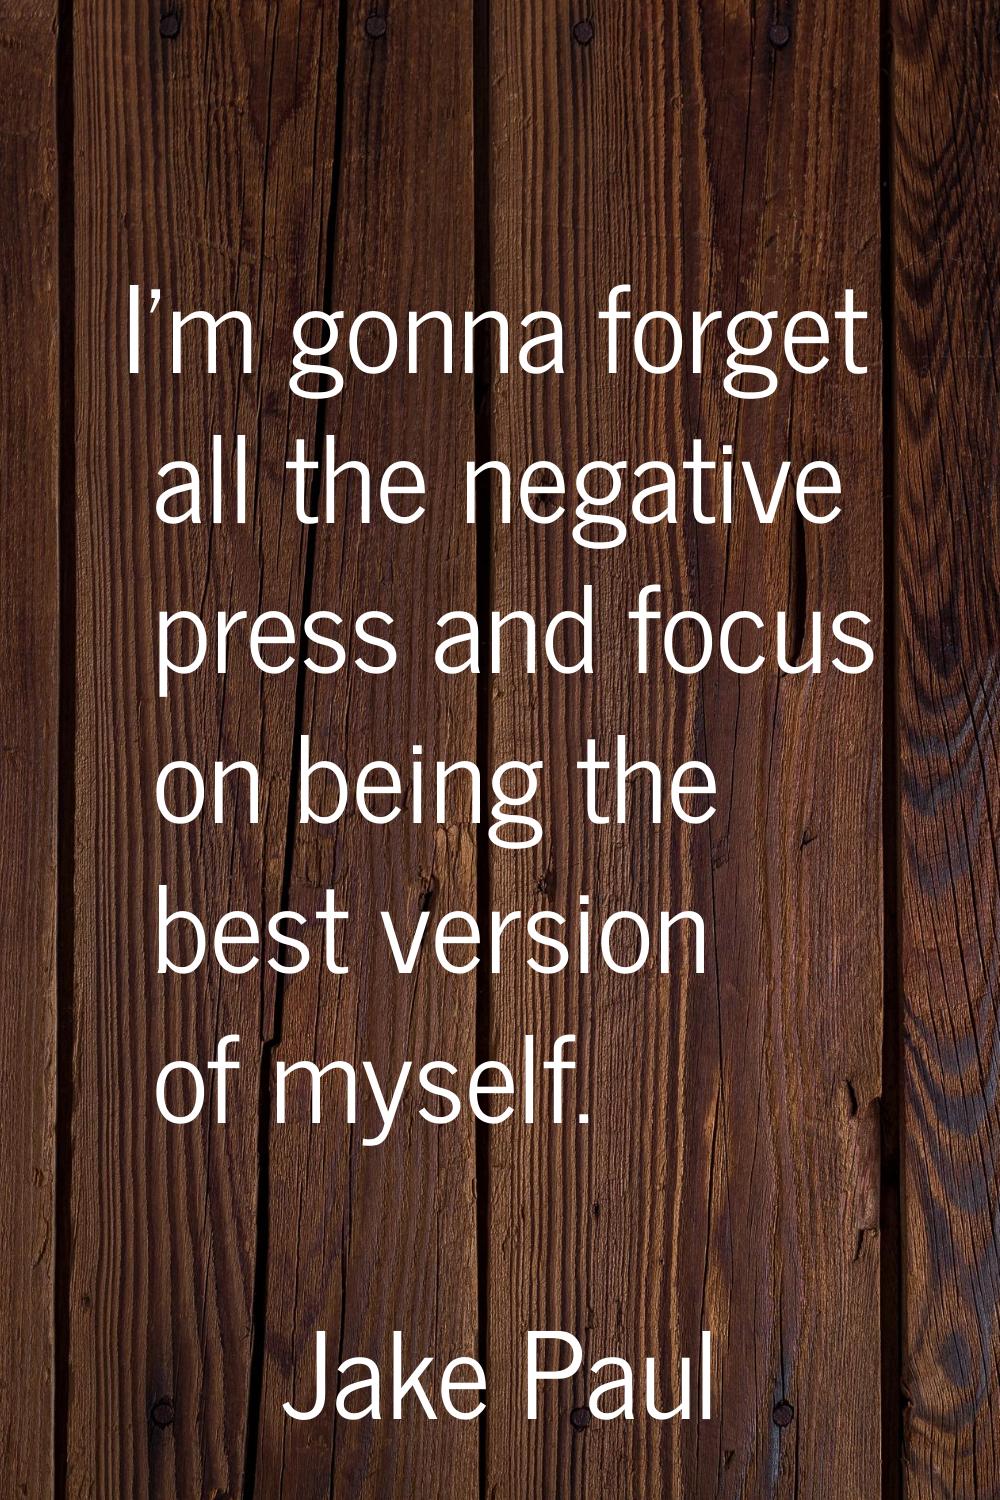 I'm gonna forget all the negative press and focus on being the best version of myself.